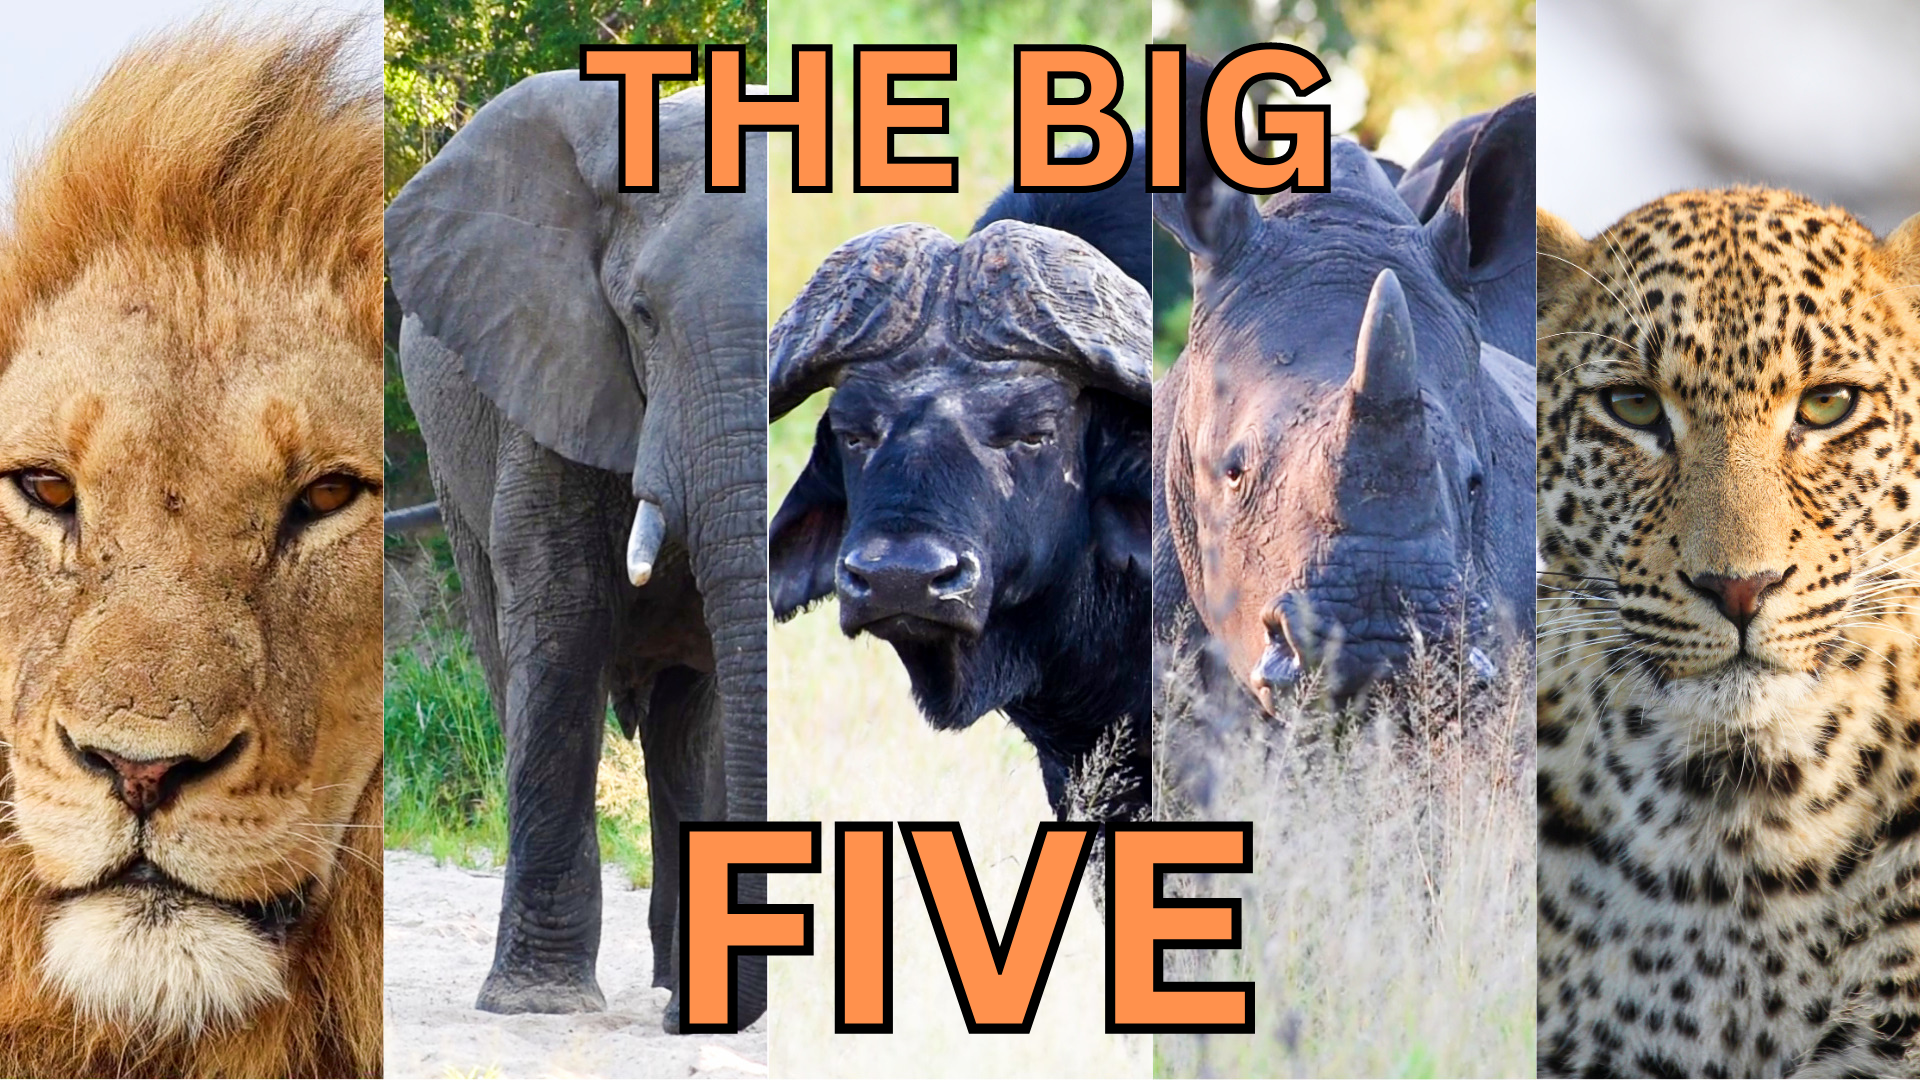 The King of the Jungle, the Tusked Giant, the Mighty Herd, the Armored Tank, and the Stealthy Hunter—explore Africa's iconic Big Five. Named for being the most challenging and dangerous to hunt on foot, they are now the most admired animals to observe on safaris.